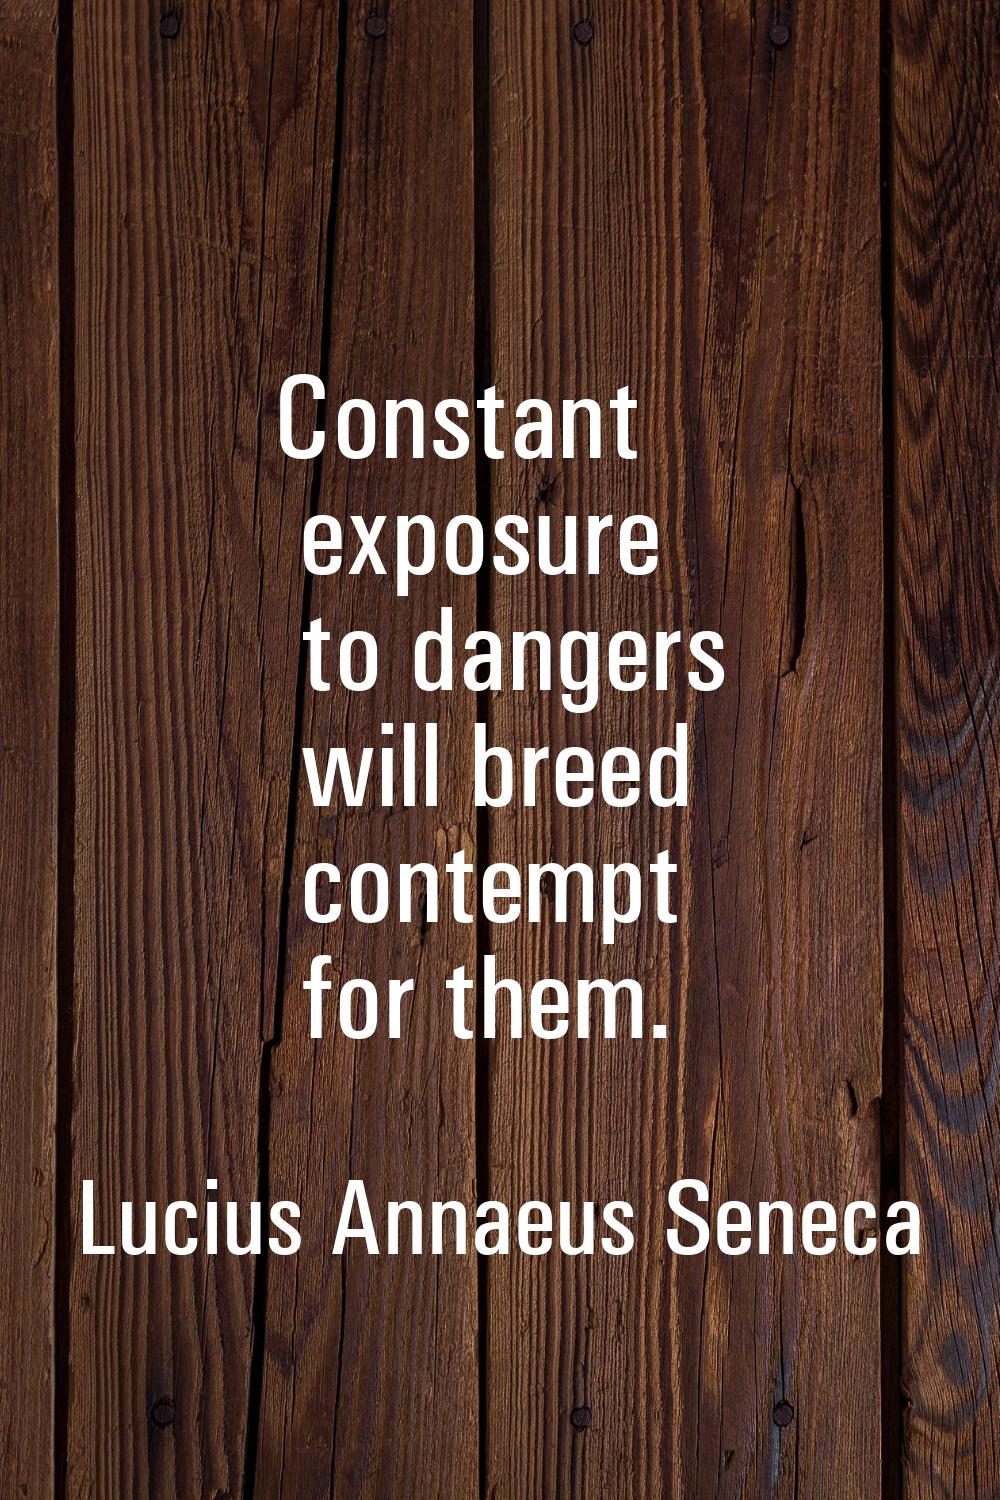 Constant exposure to dangers will breed contempt for them.